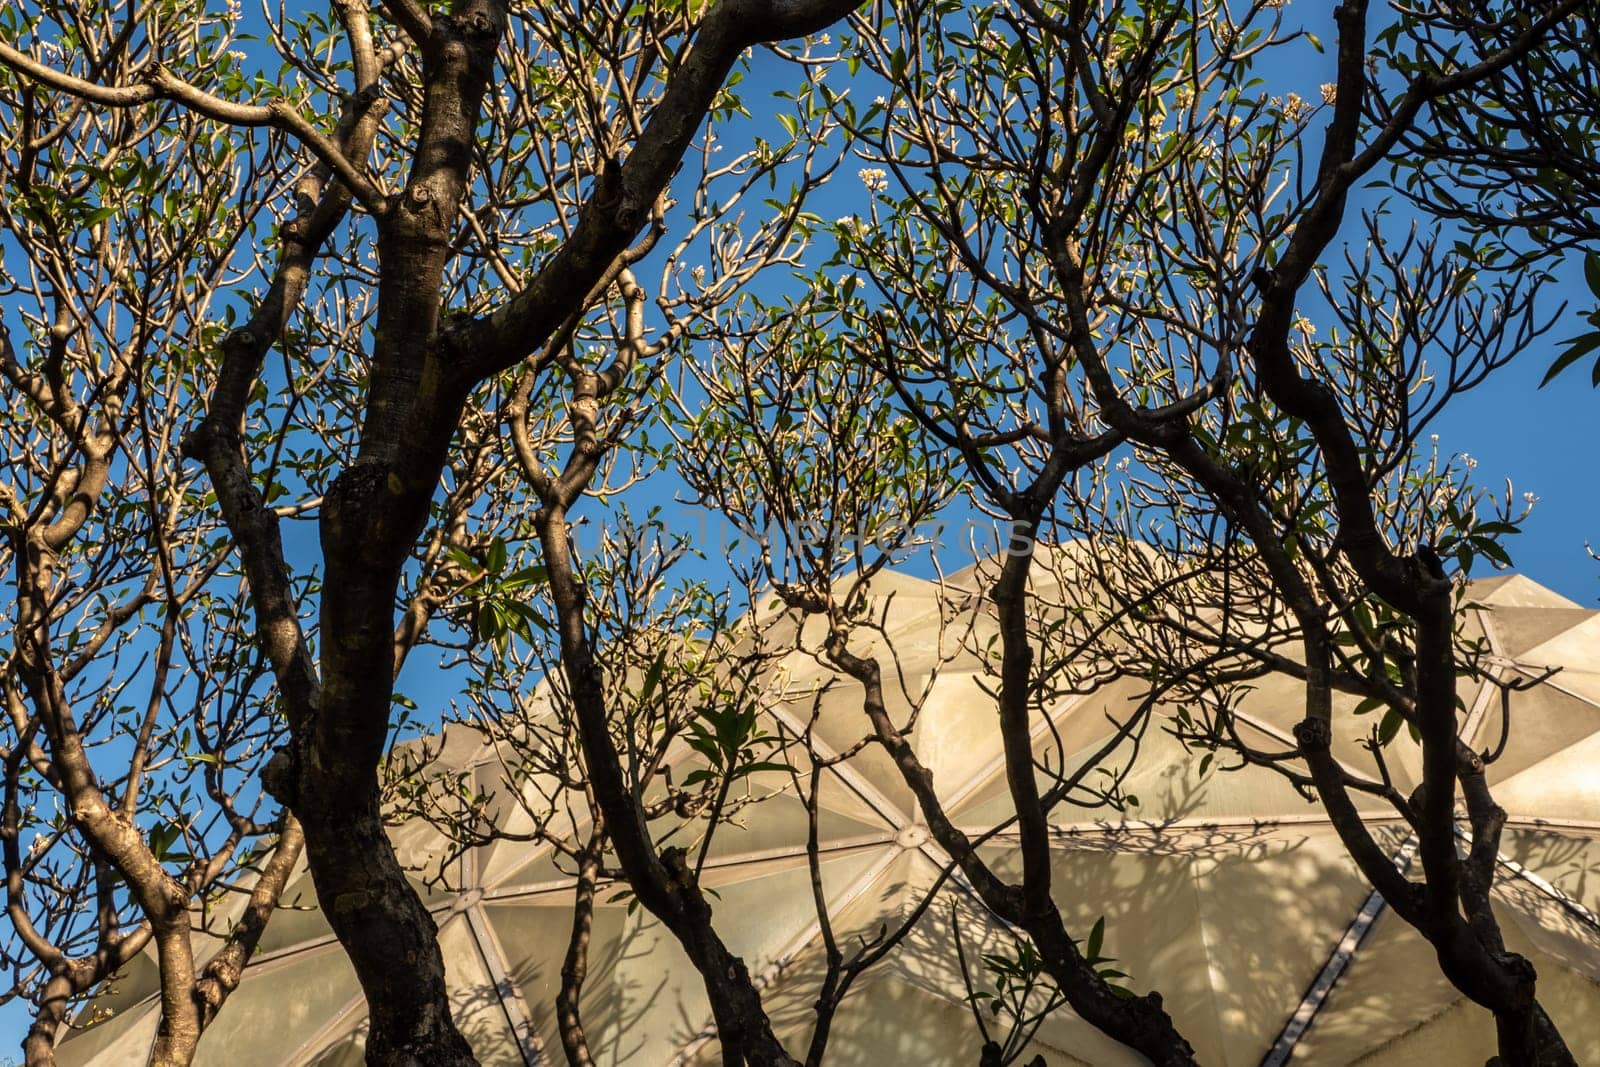 A grove of frangipani trees surrounds the dome of the desert plants